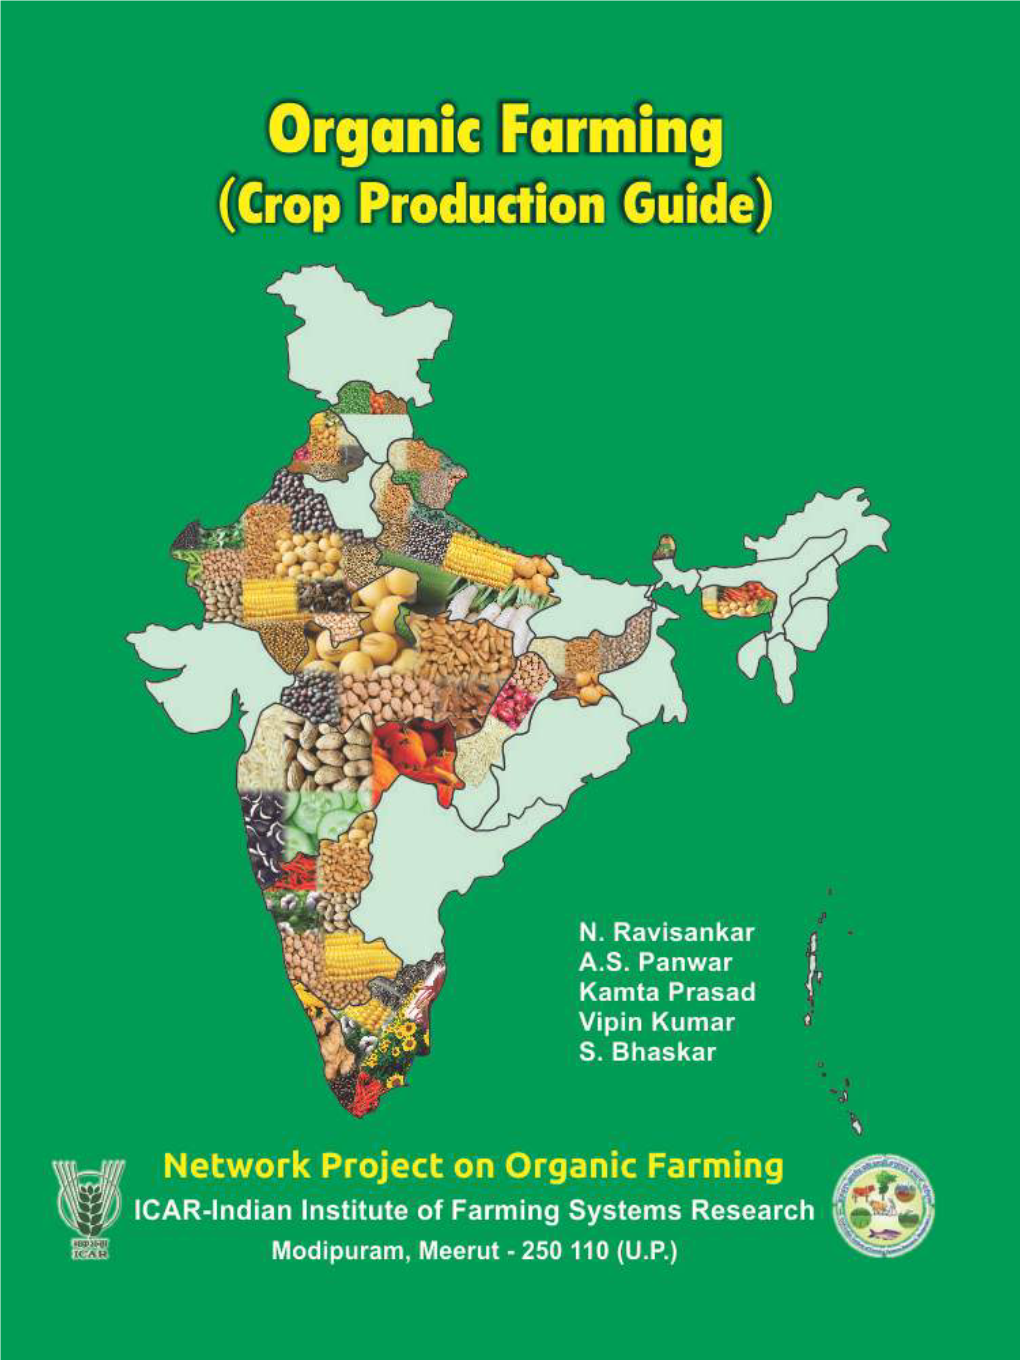 Crop Production Guide)